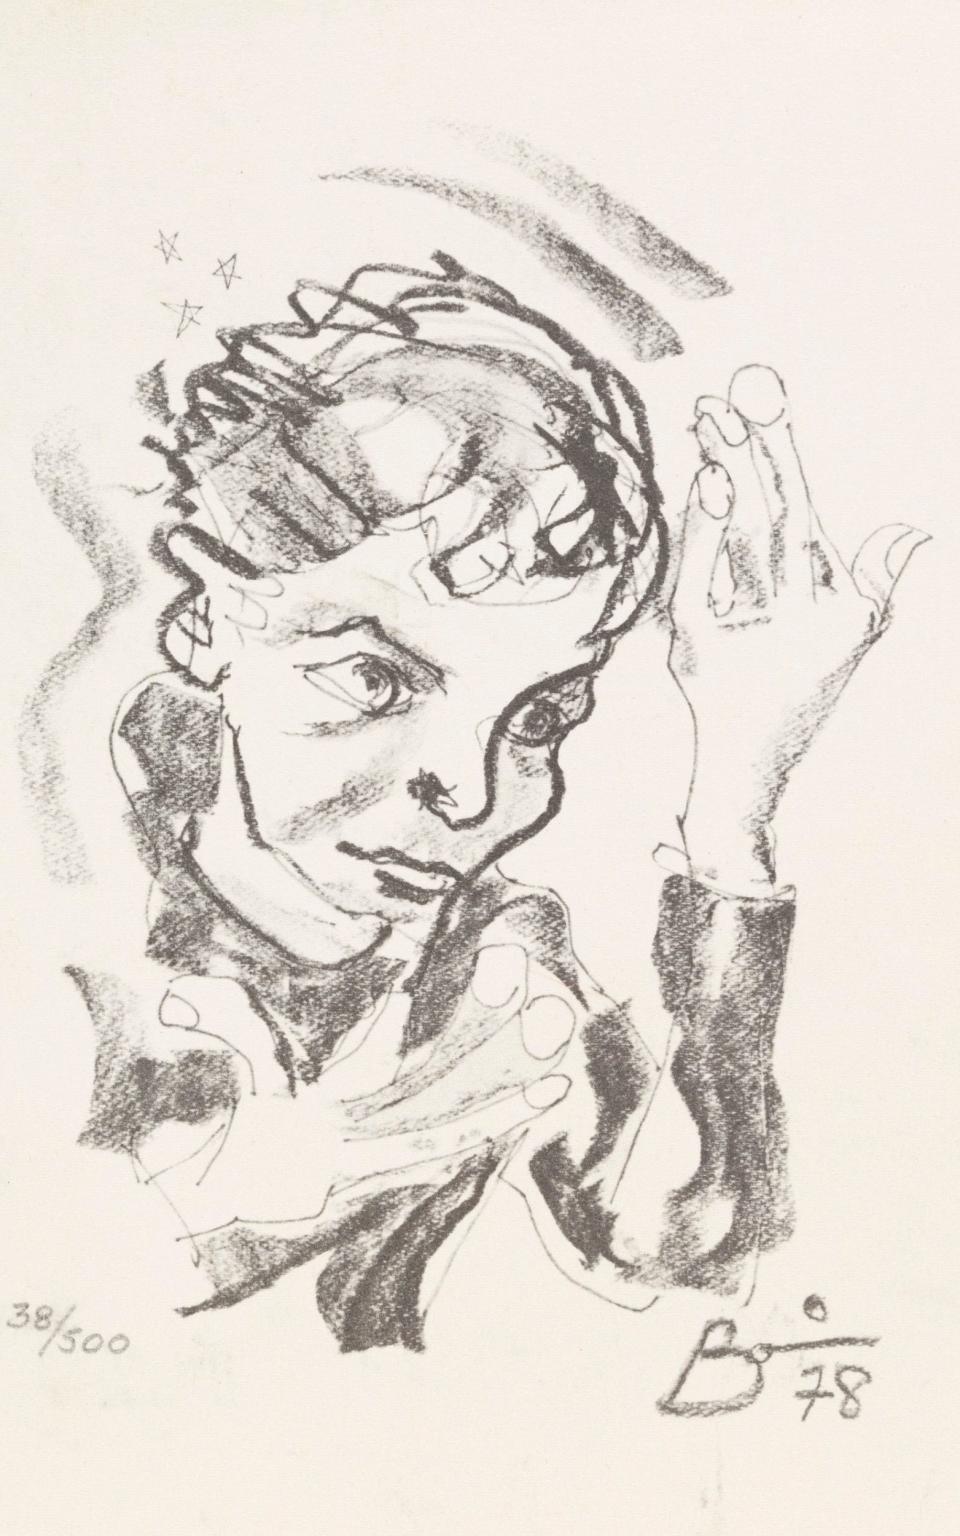 A self-portrait of Bowie that will feature in the forthcoming display - The David Bowie Archive